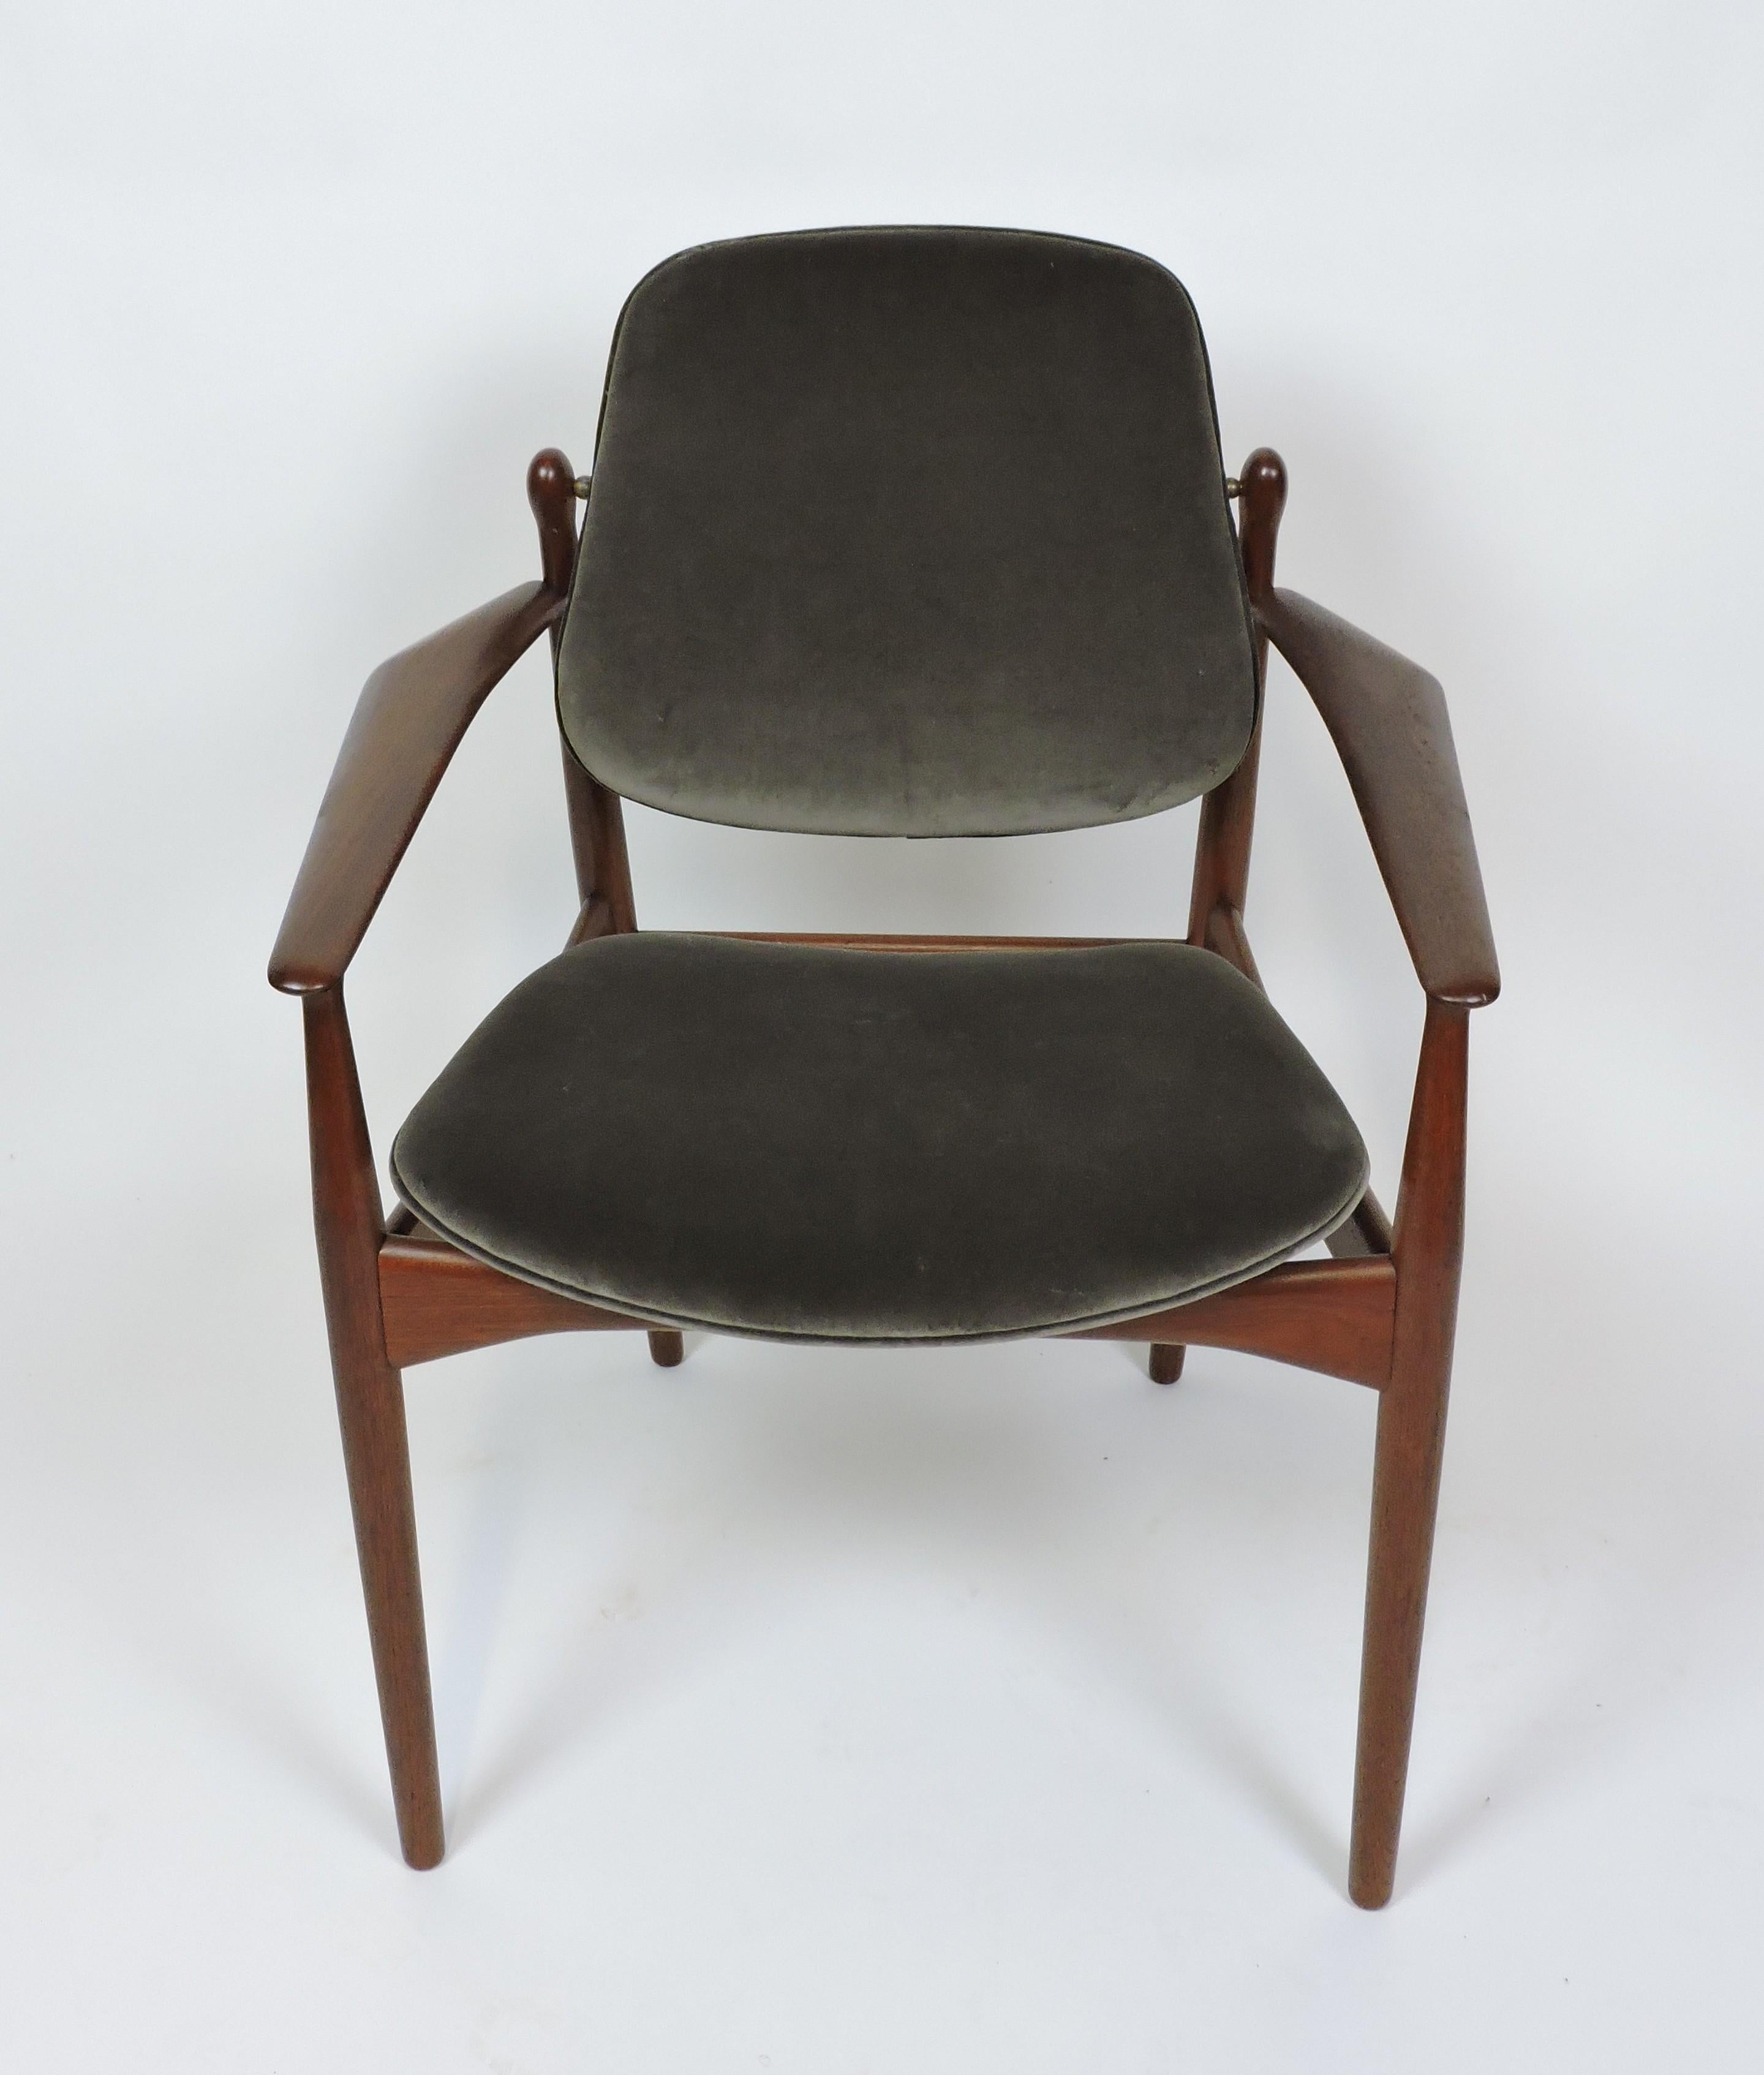 Danish modern teak arm chair, model FD 184/L, designed by Arne Vodder in 1956 and made in Denmark by France and Daverkosen. This elegant chair has a floating seat, a back that pivots on brass fittings for comfort, and a solid teak sculptural frame.